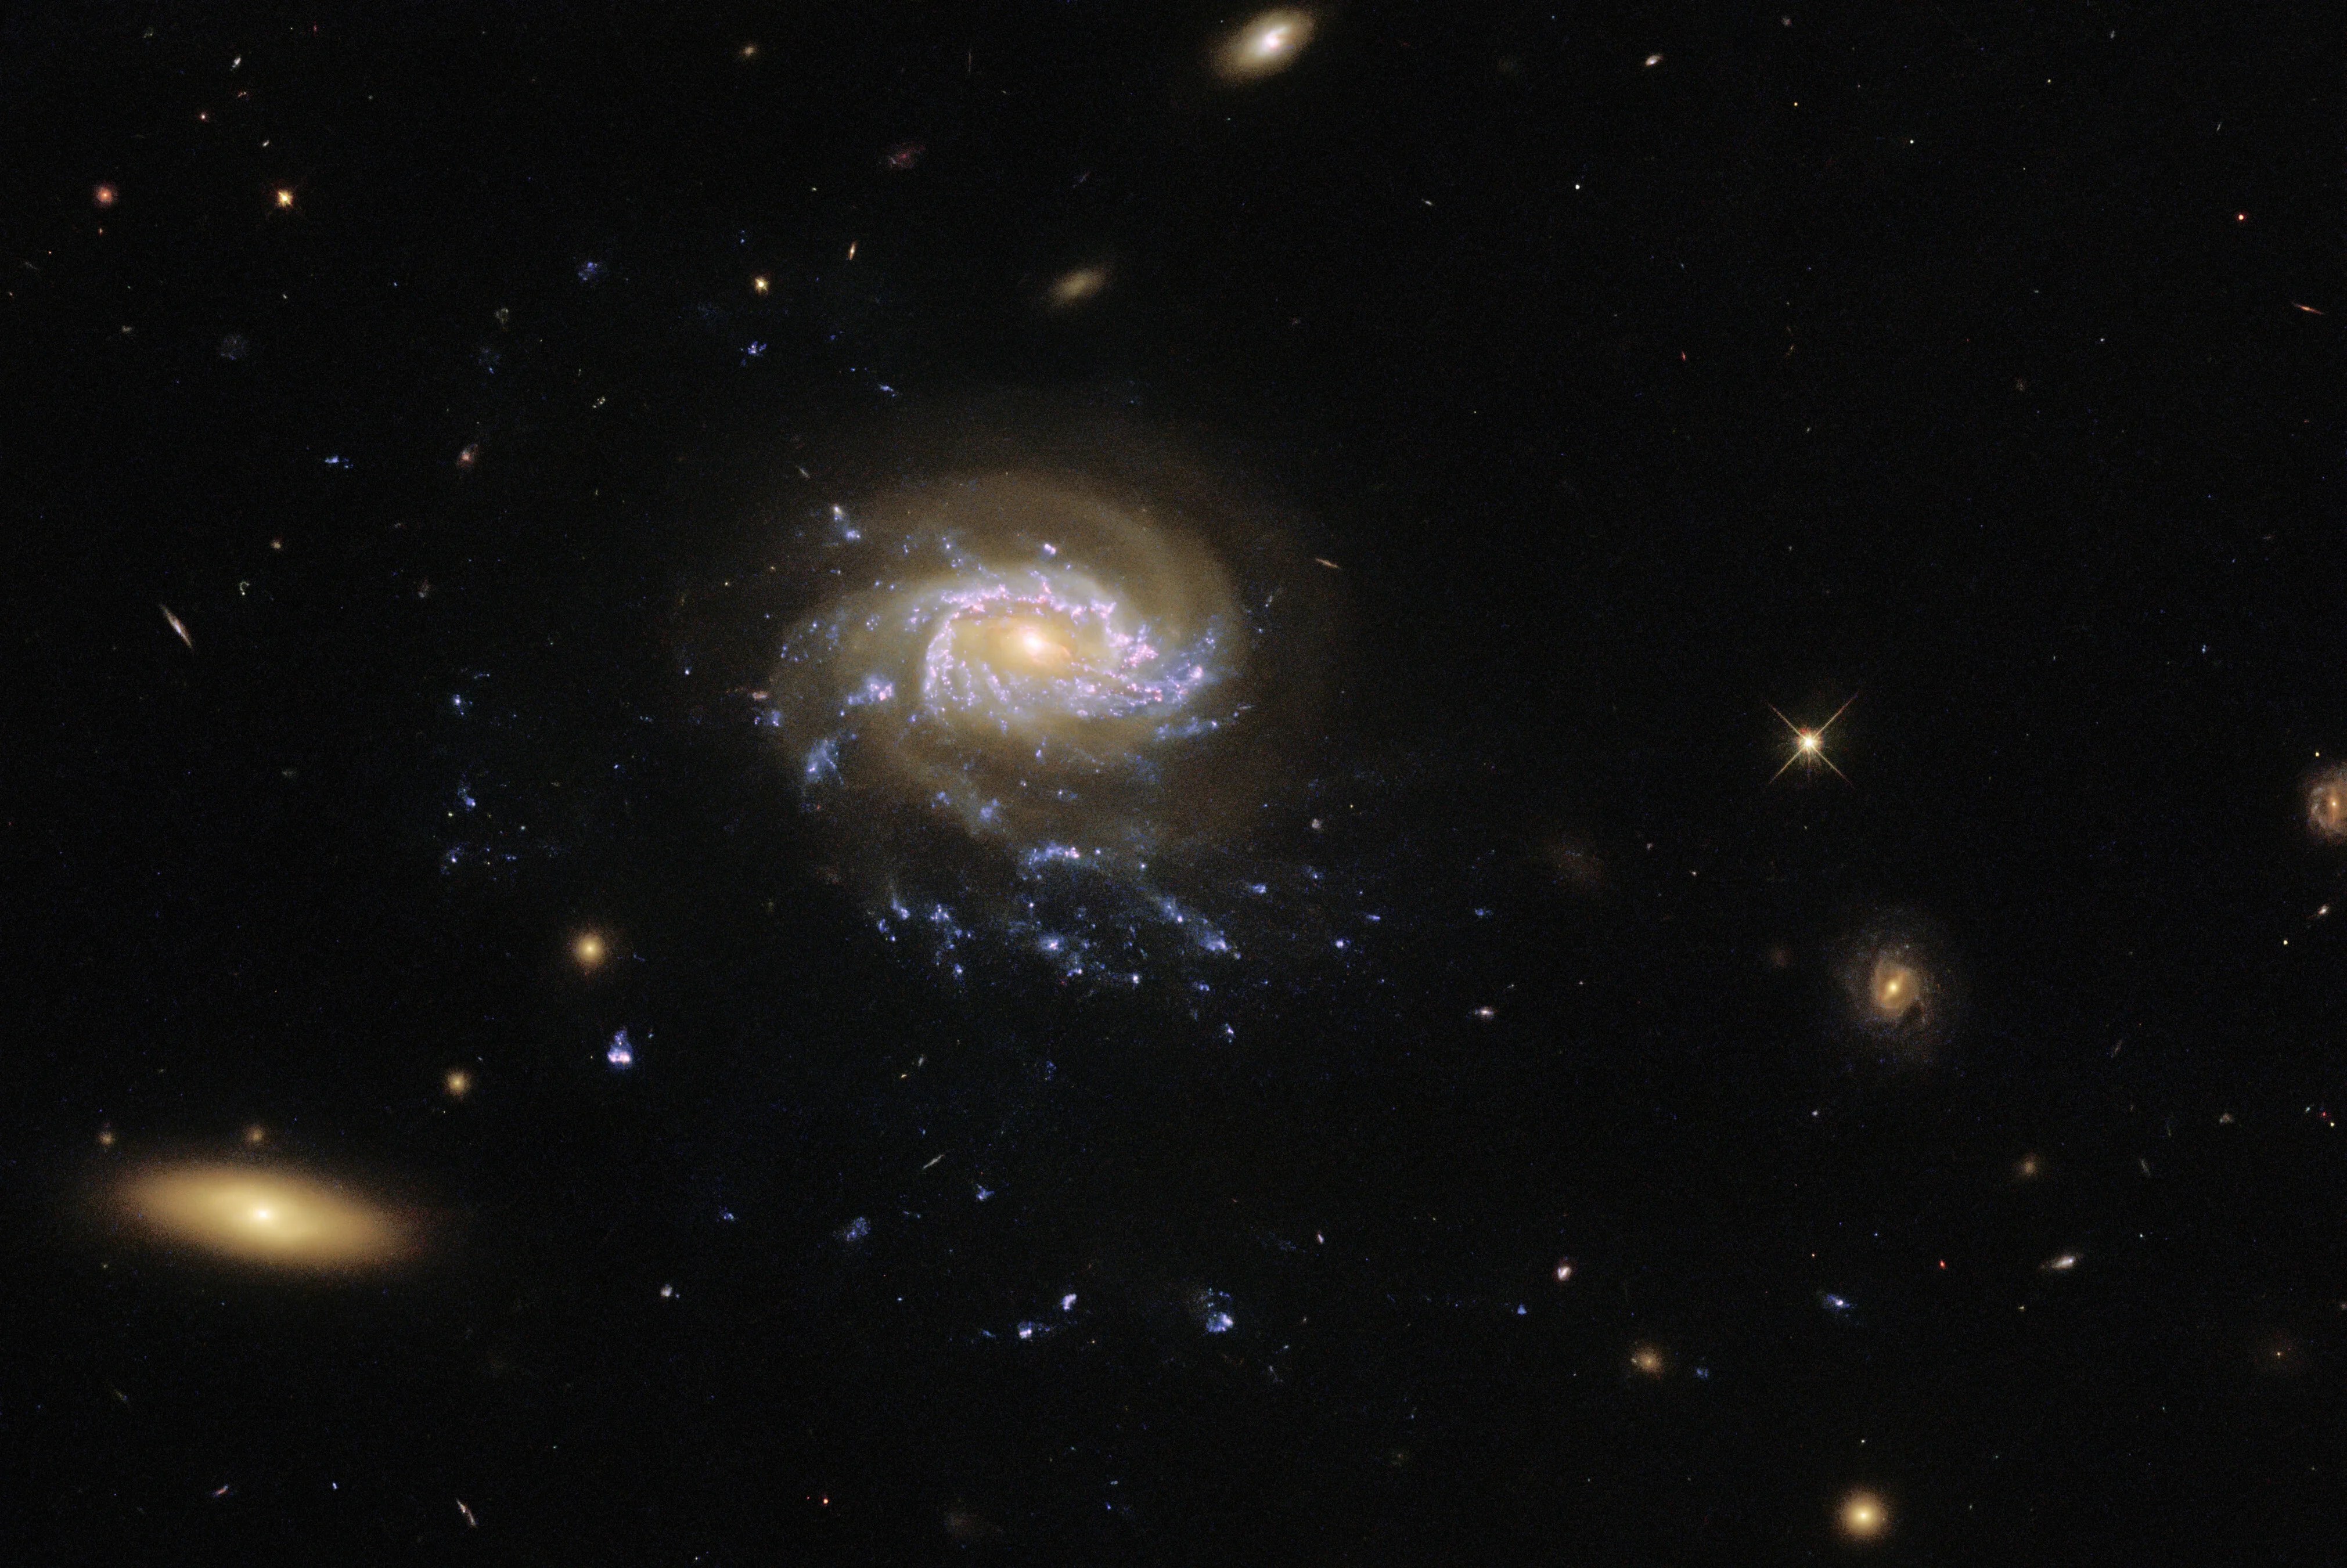 A spiral galaxy lies just off-centre. It has large, faint, reddish spiral arms and a bright, reddish core. These lie over two brighter blue spiral arms. These are patchy, with blotches of star formation. Long trails of these bright blotches trail down from the lower spiral arm, resembling tendrils. The background is black, lightly scattered with small galaxies and stars, and a larger elliptical galaxy in one corner.